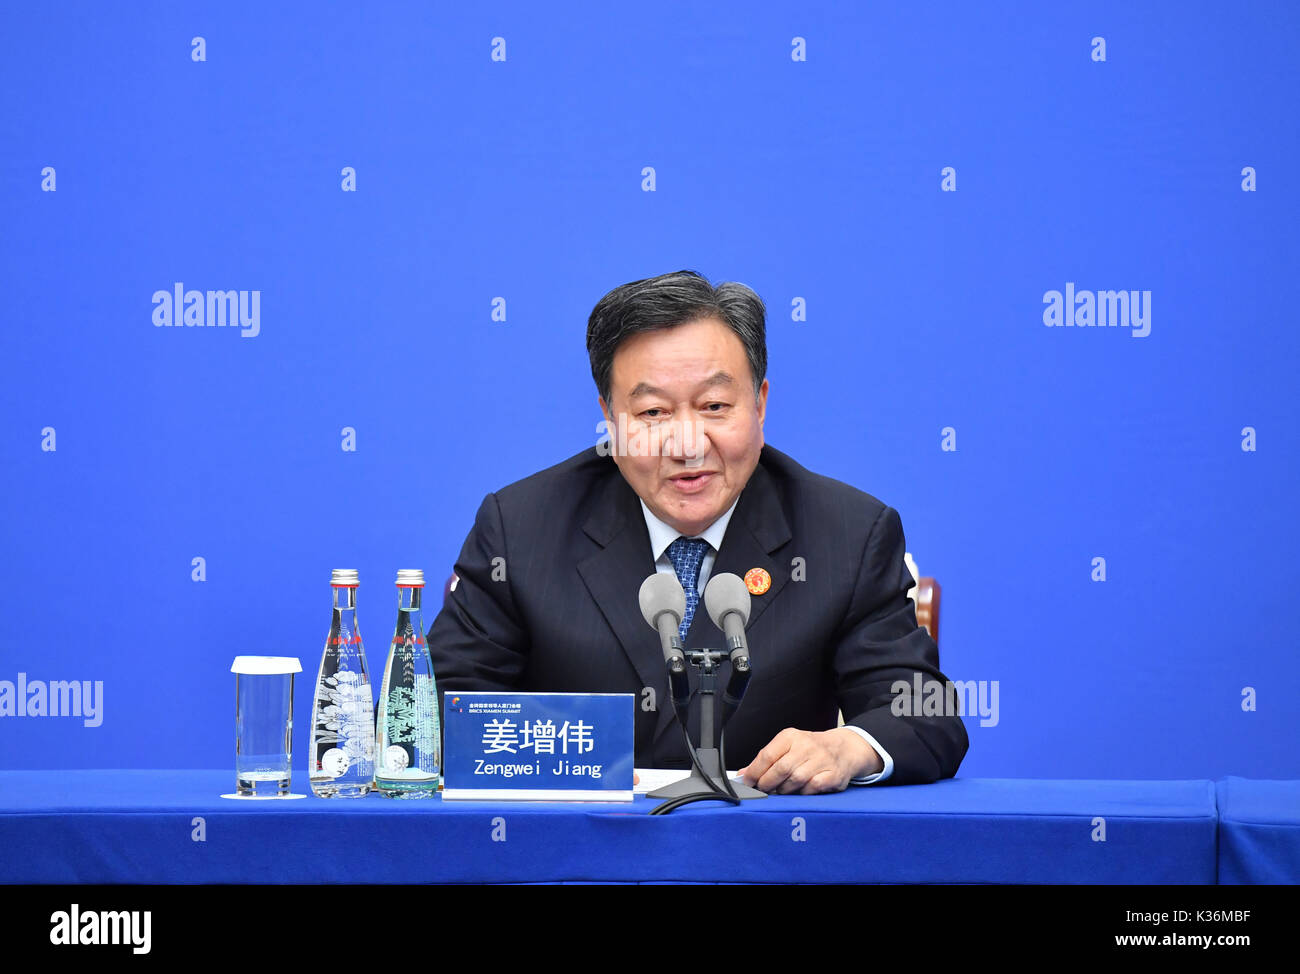 Xiamen, China's Fujian Province. 2nd Sep, 2017. Jiang Zengwei, director of the Organizing Committee of the BRICS Business Forum 2017 and chairman of China Council for the Promotion of International Trade, attends a press conference at the media center for the 2017 BRICS Summit in Xiamen, southeast China's Fujian Province, Sept. 2, 2017. Credit: Li Xin/Xinhua/Alamy Live News Stock Photo